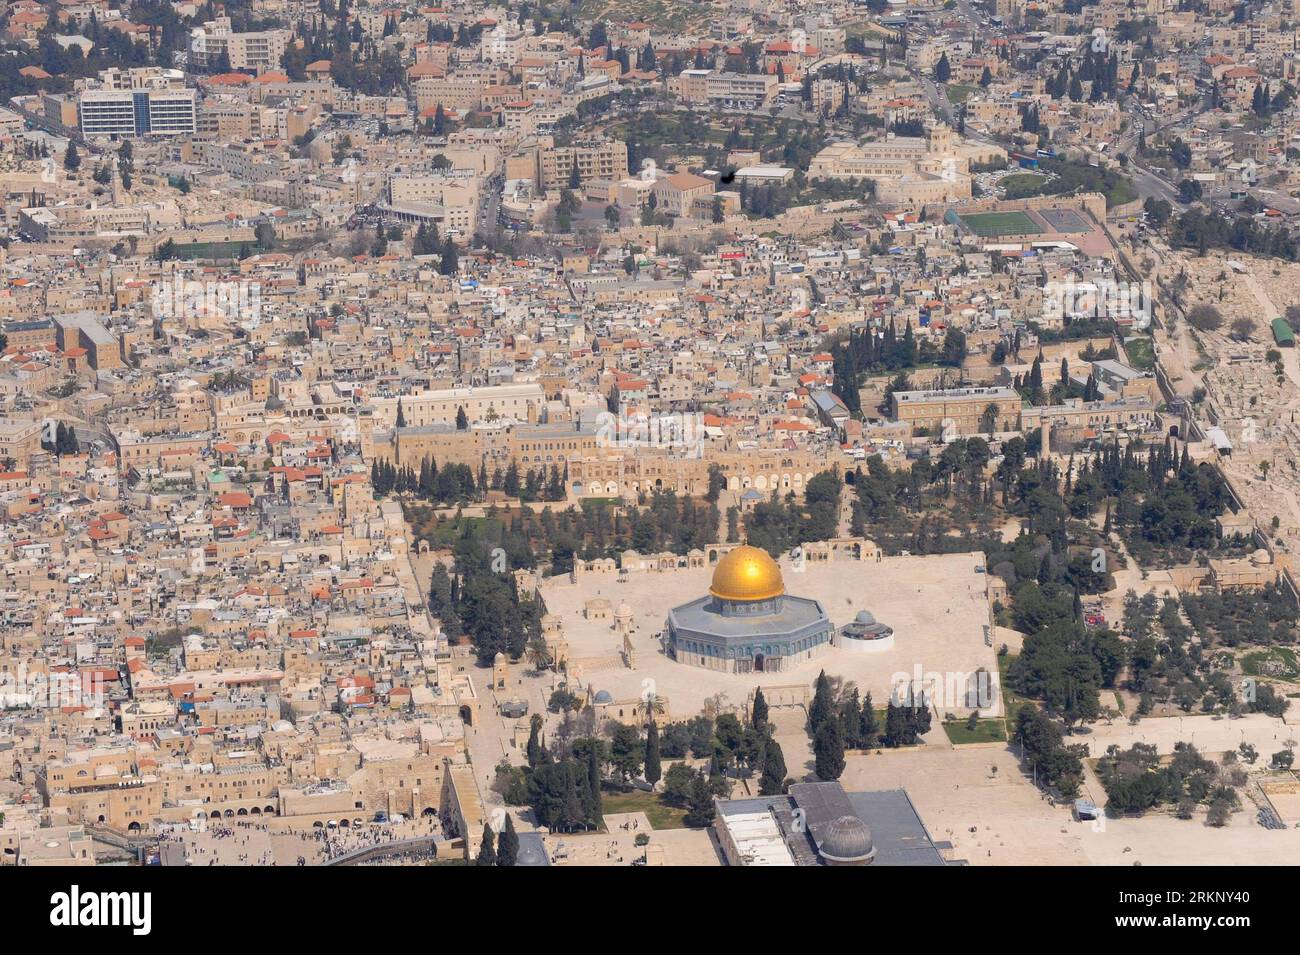 Bildnummer: 57690408  Datum: 27.03.2012  Copyright: imago/Xinhua (120326)-- JERUSALEM, March 26, 2012 (Xinhua) -- Photo taken on March 26, 2012 shows the bird s-eye view of the old city of Jerusalem. Jerusalem is located in the Judean Mountains between the Mediterranean Sea and the northern edge of the Dead Sea. It is a holy city to the three major religions -- Judaism, Christianity and Islam. Today, the status of Jerusalem remains on the core issues in the Israeli-Palestinian conflict. (Xinhua/Yin Dongxun) MIDEAST-JERUSALEM-AERIAL VIEW PUBLICATIONxNOTxINxCHN Gesellschaft Luftaufnahme Totale L Stock Photo